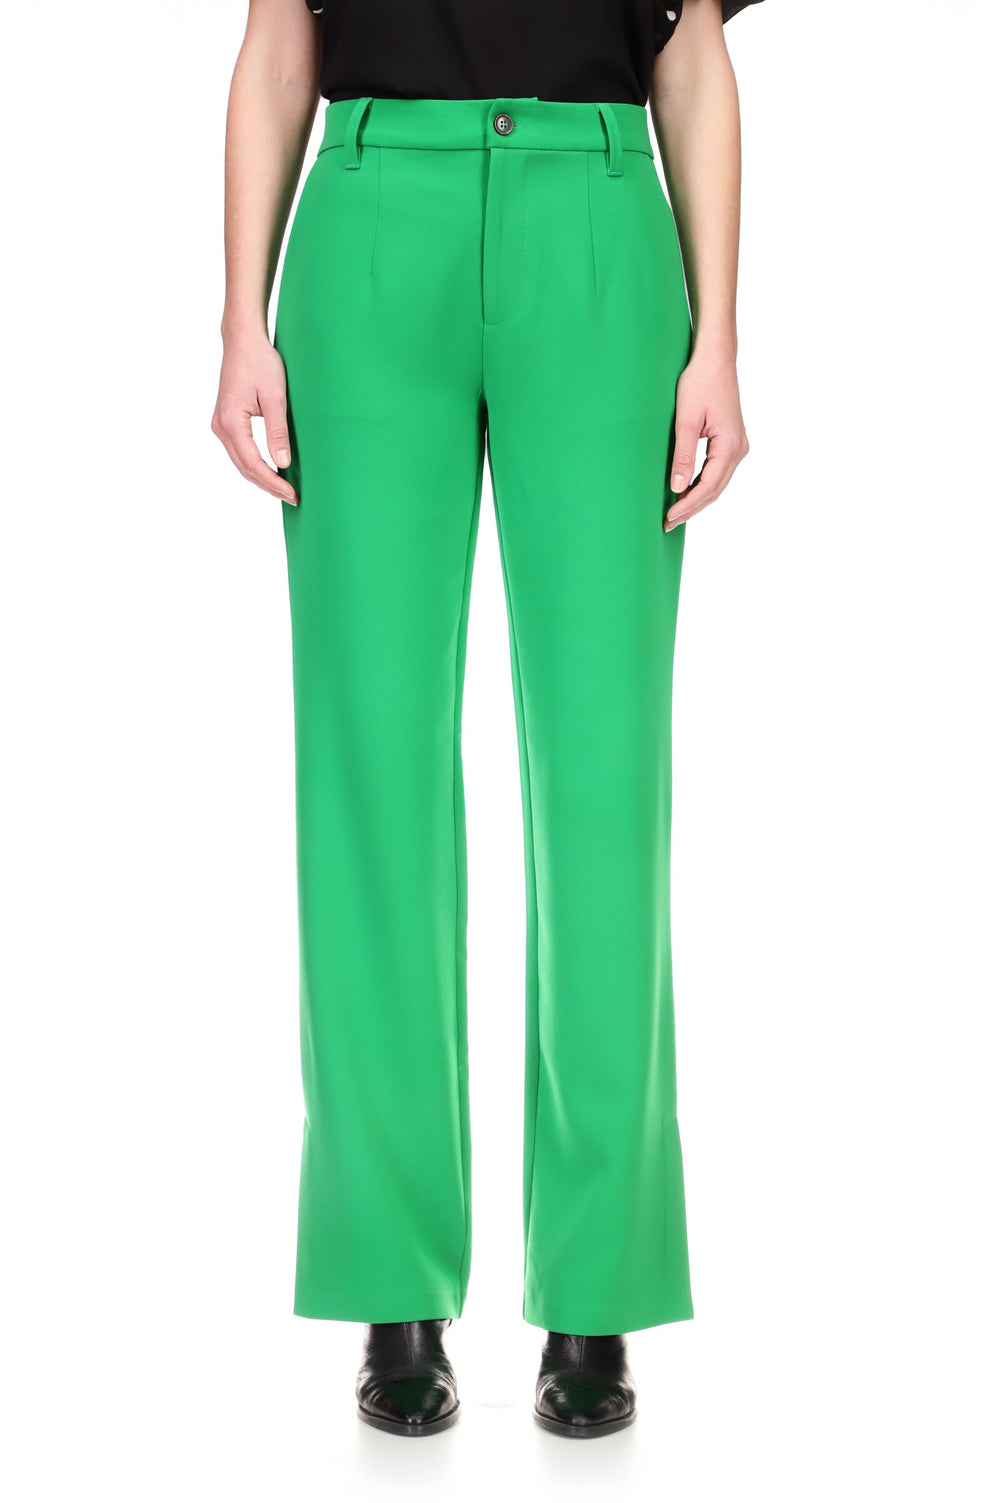 PINE NOHO TROUSER PANT - Kingfisher Road - Online Boutique